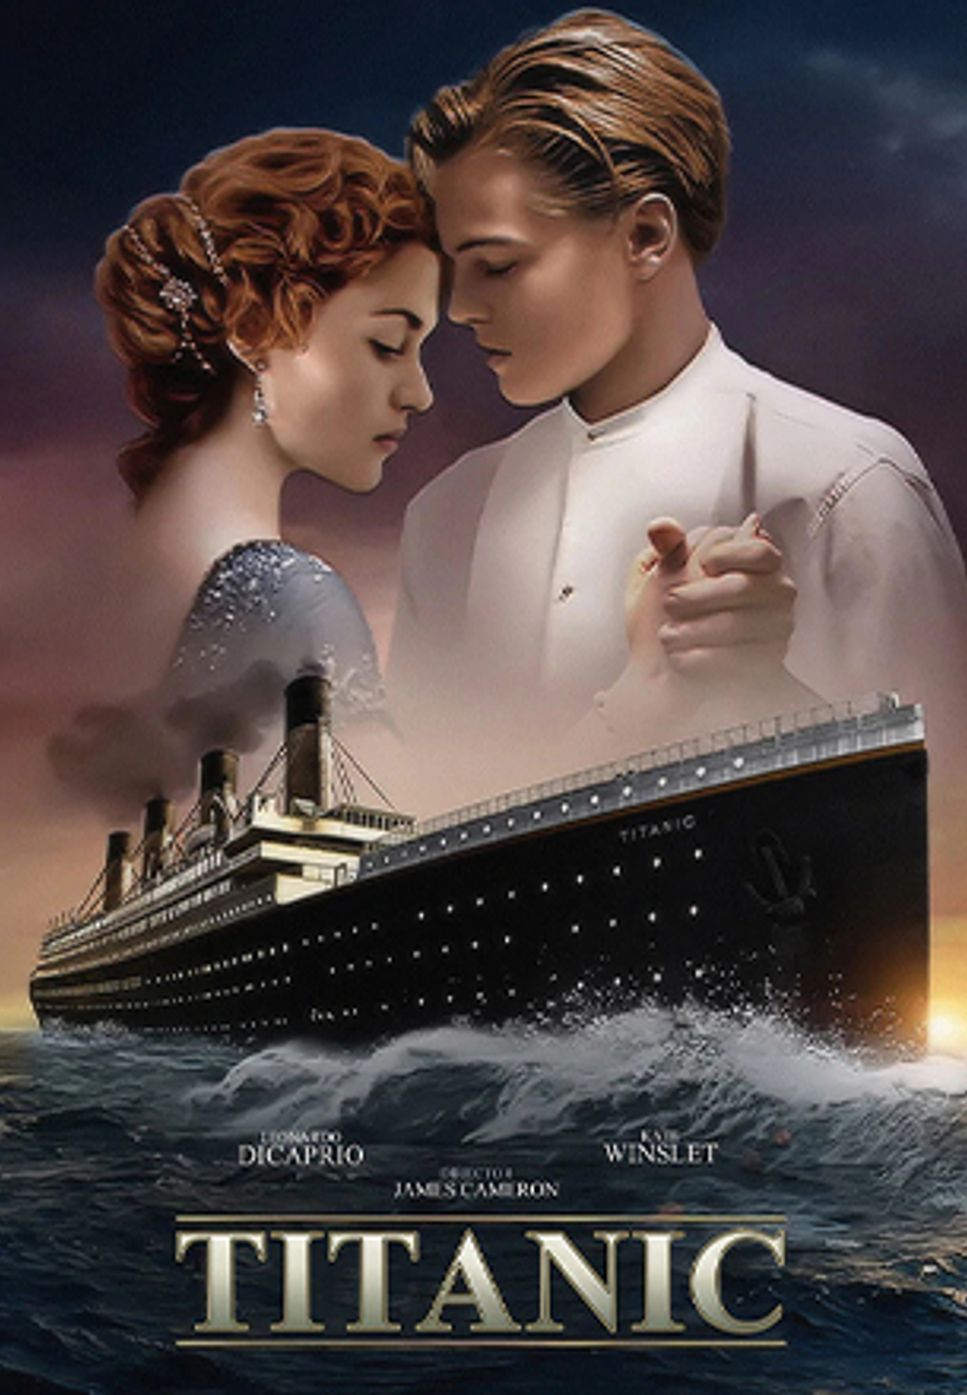 Titanic - My Heart Will Go On (James Horner) by Piano Go Life